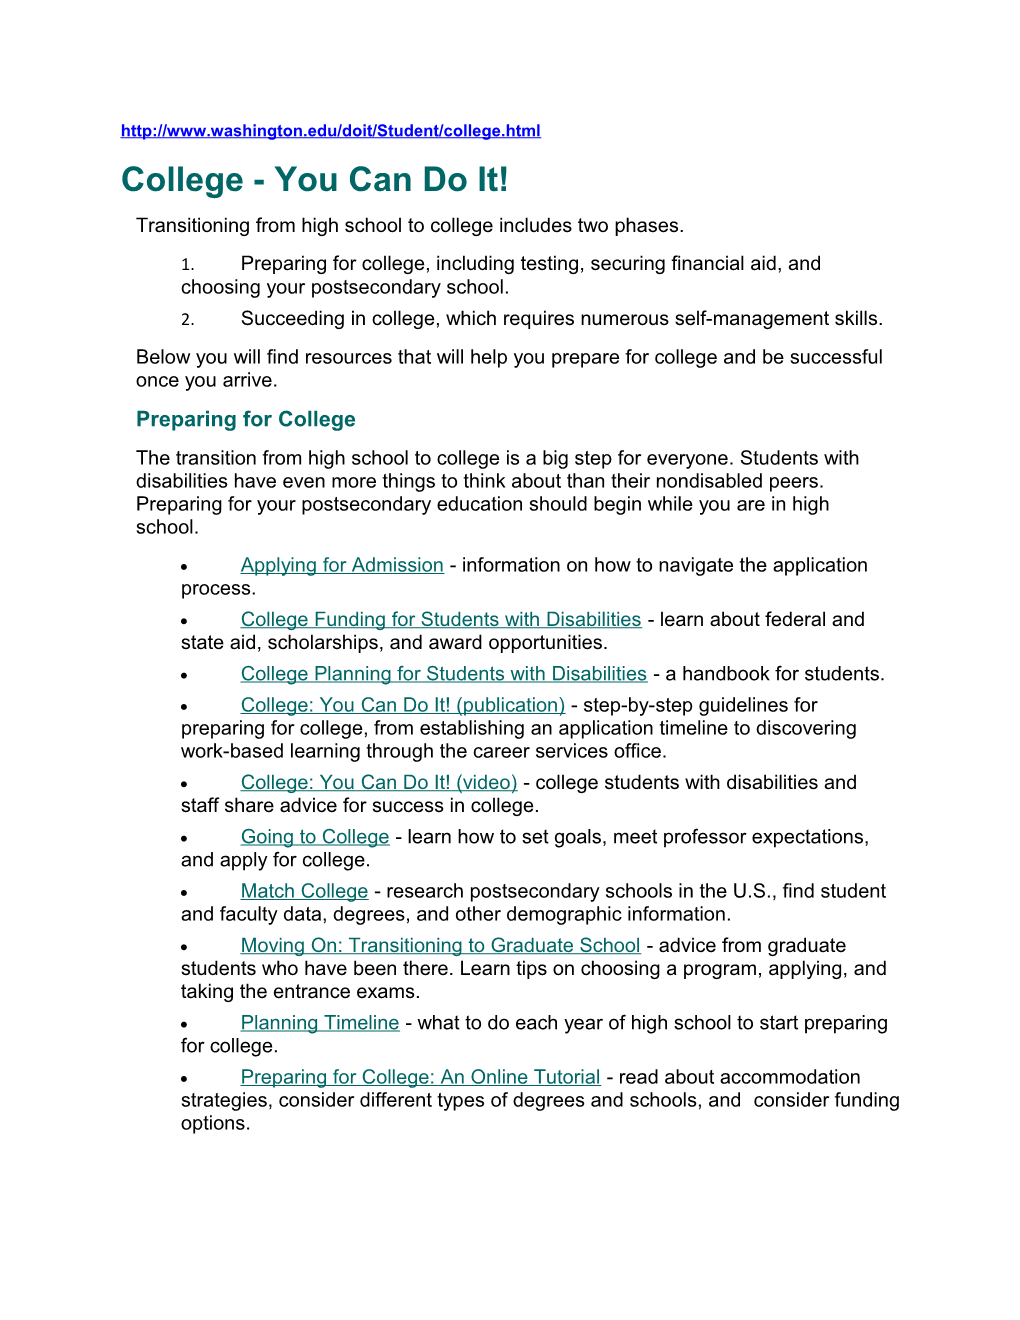 College - You Can Do It!